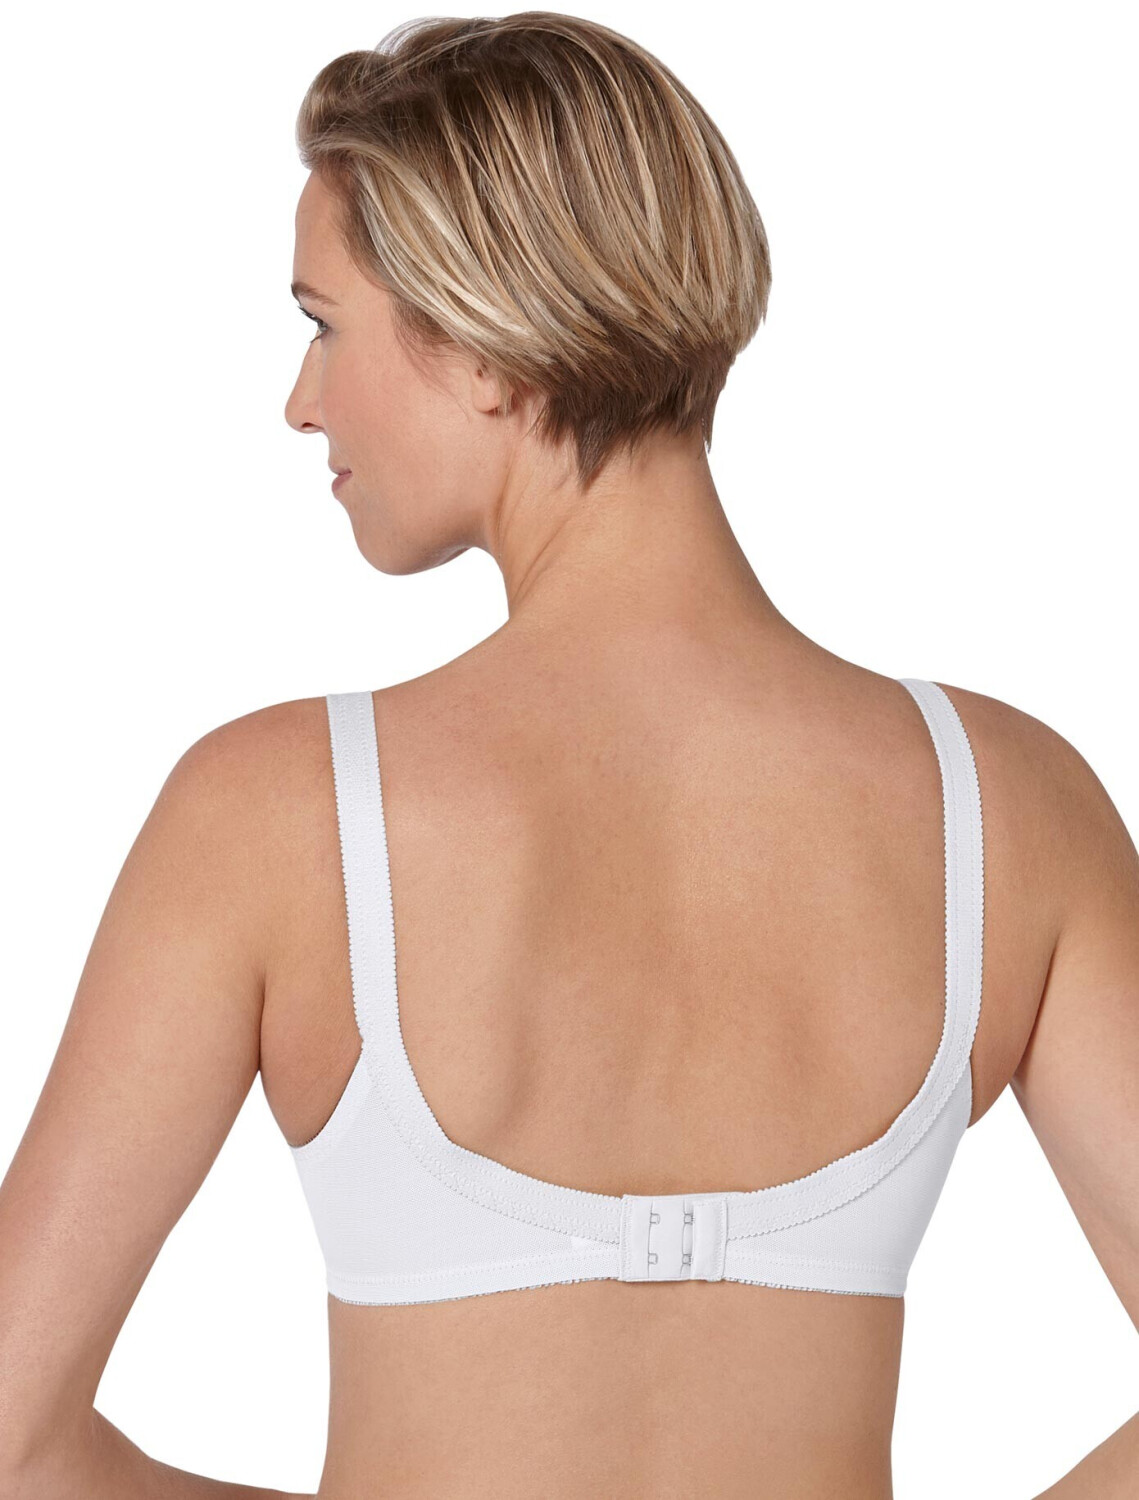 Buy Triumph Doreen N - Non-wired bra (10166213) white from £29.50 (Today) –  Best Deals on